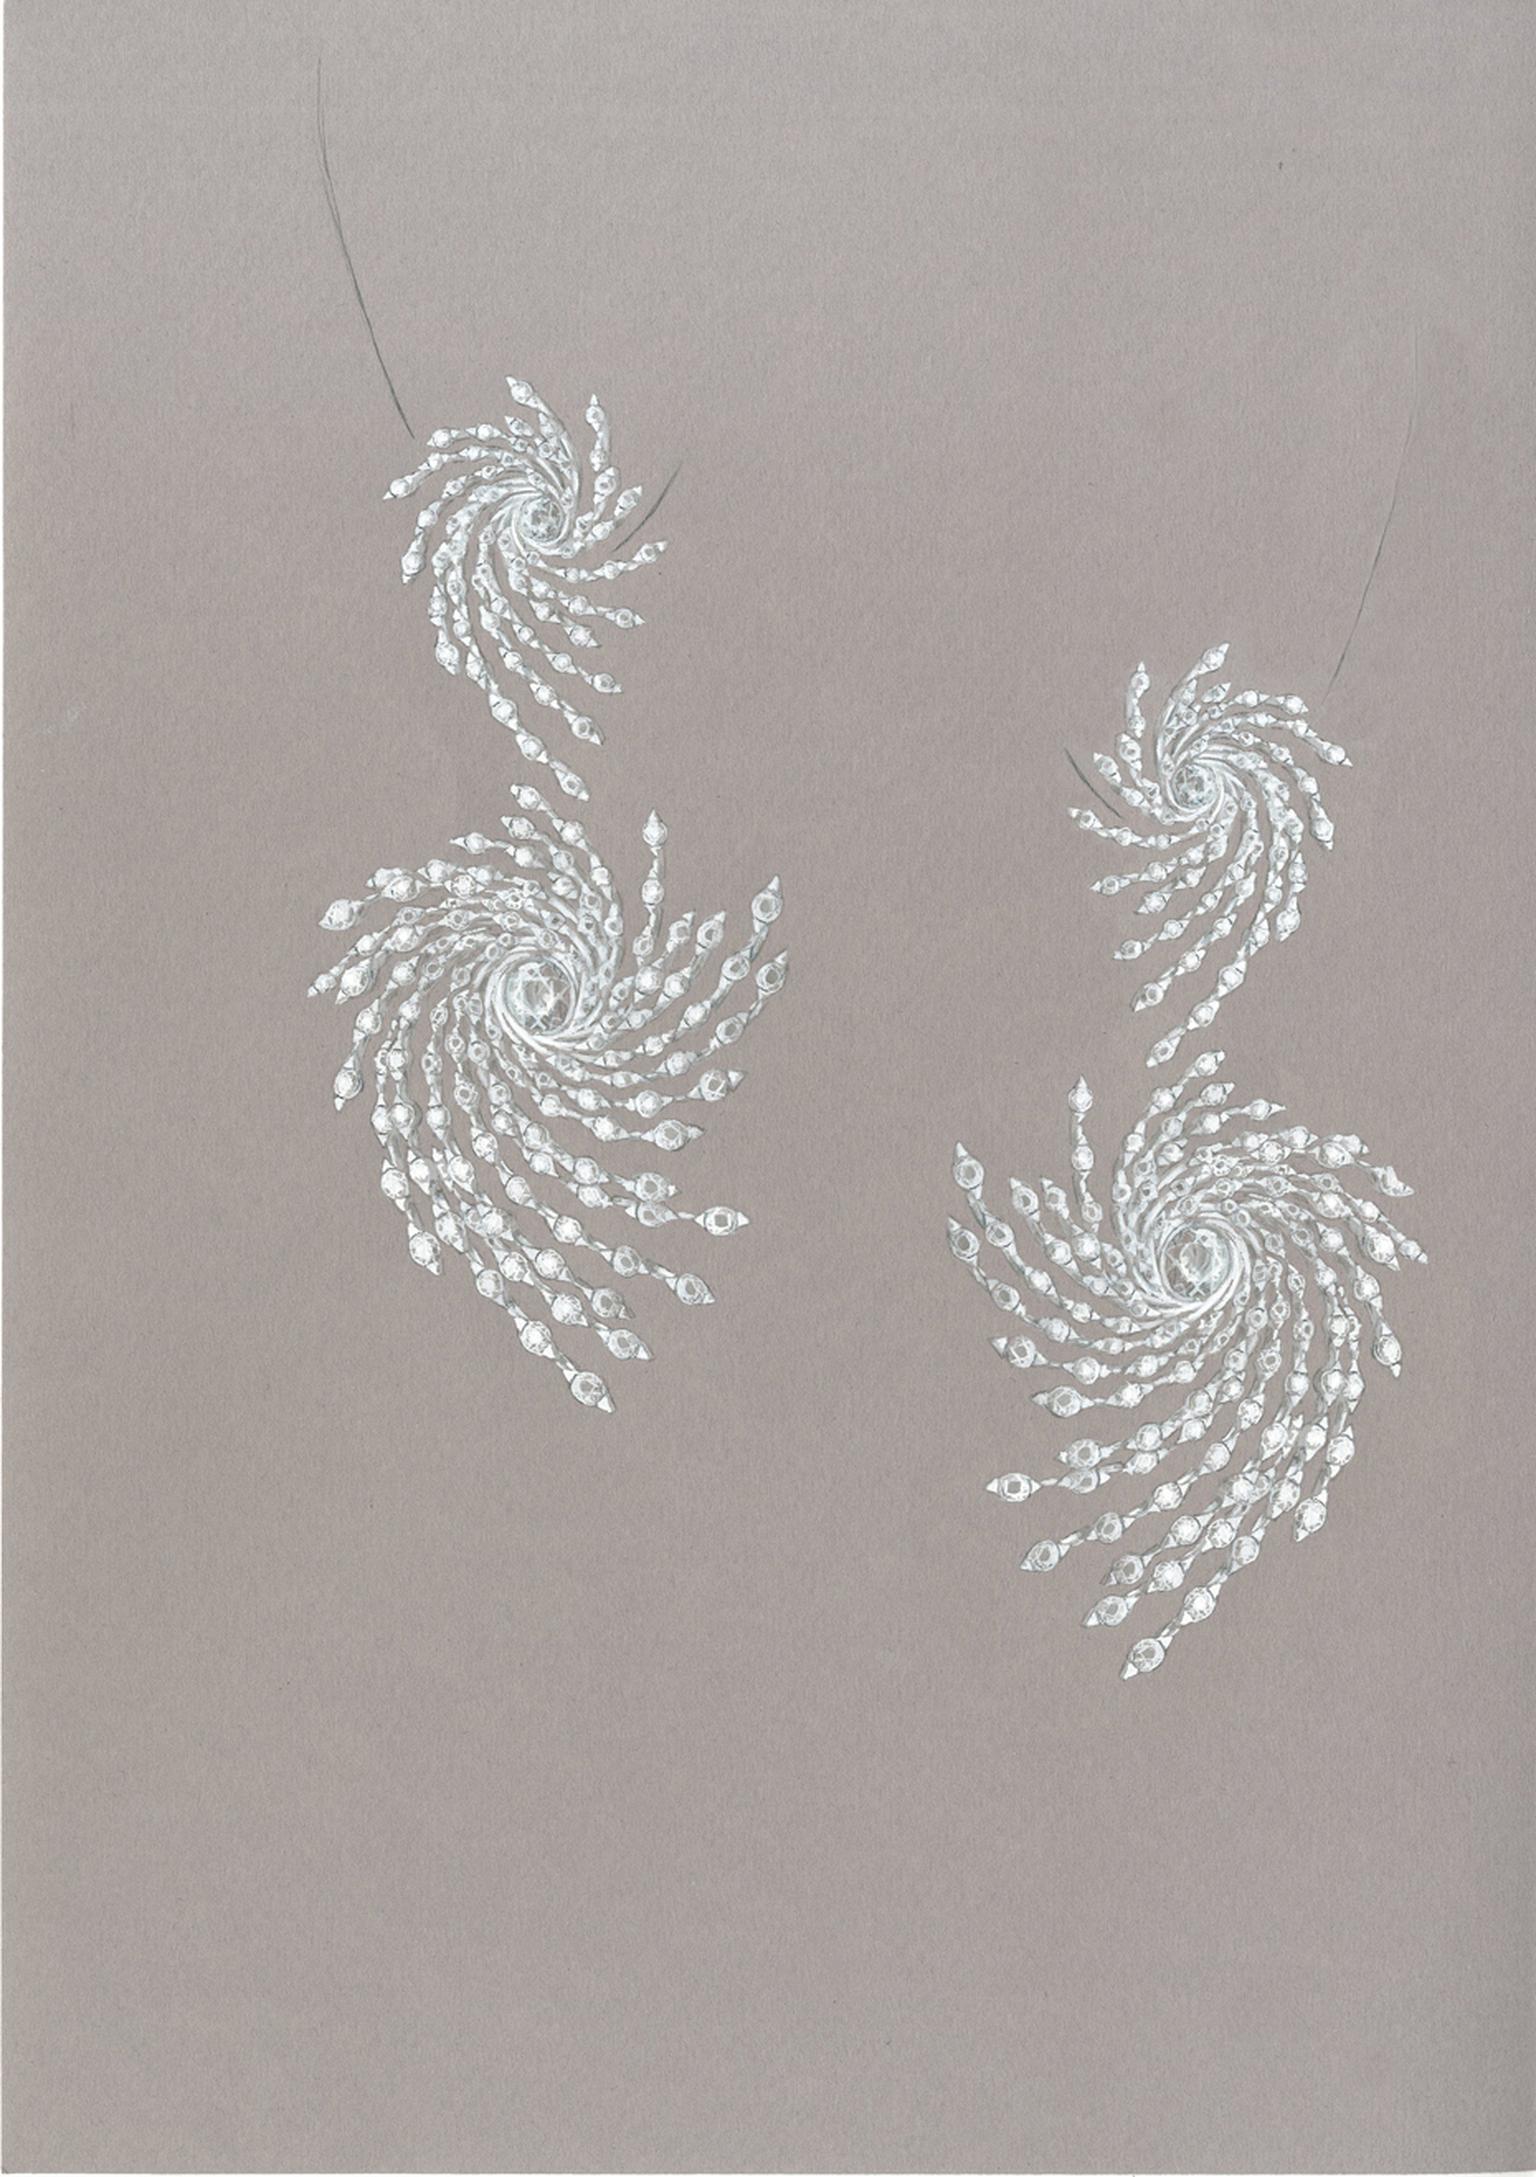 Shaun Leane's original sketch of the one-off Storm earrings he designed for Asprey